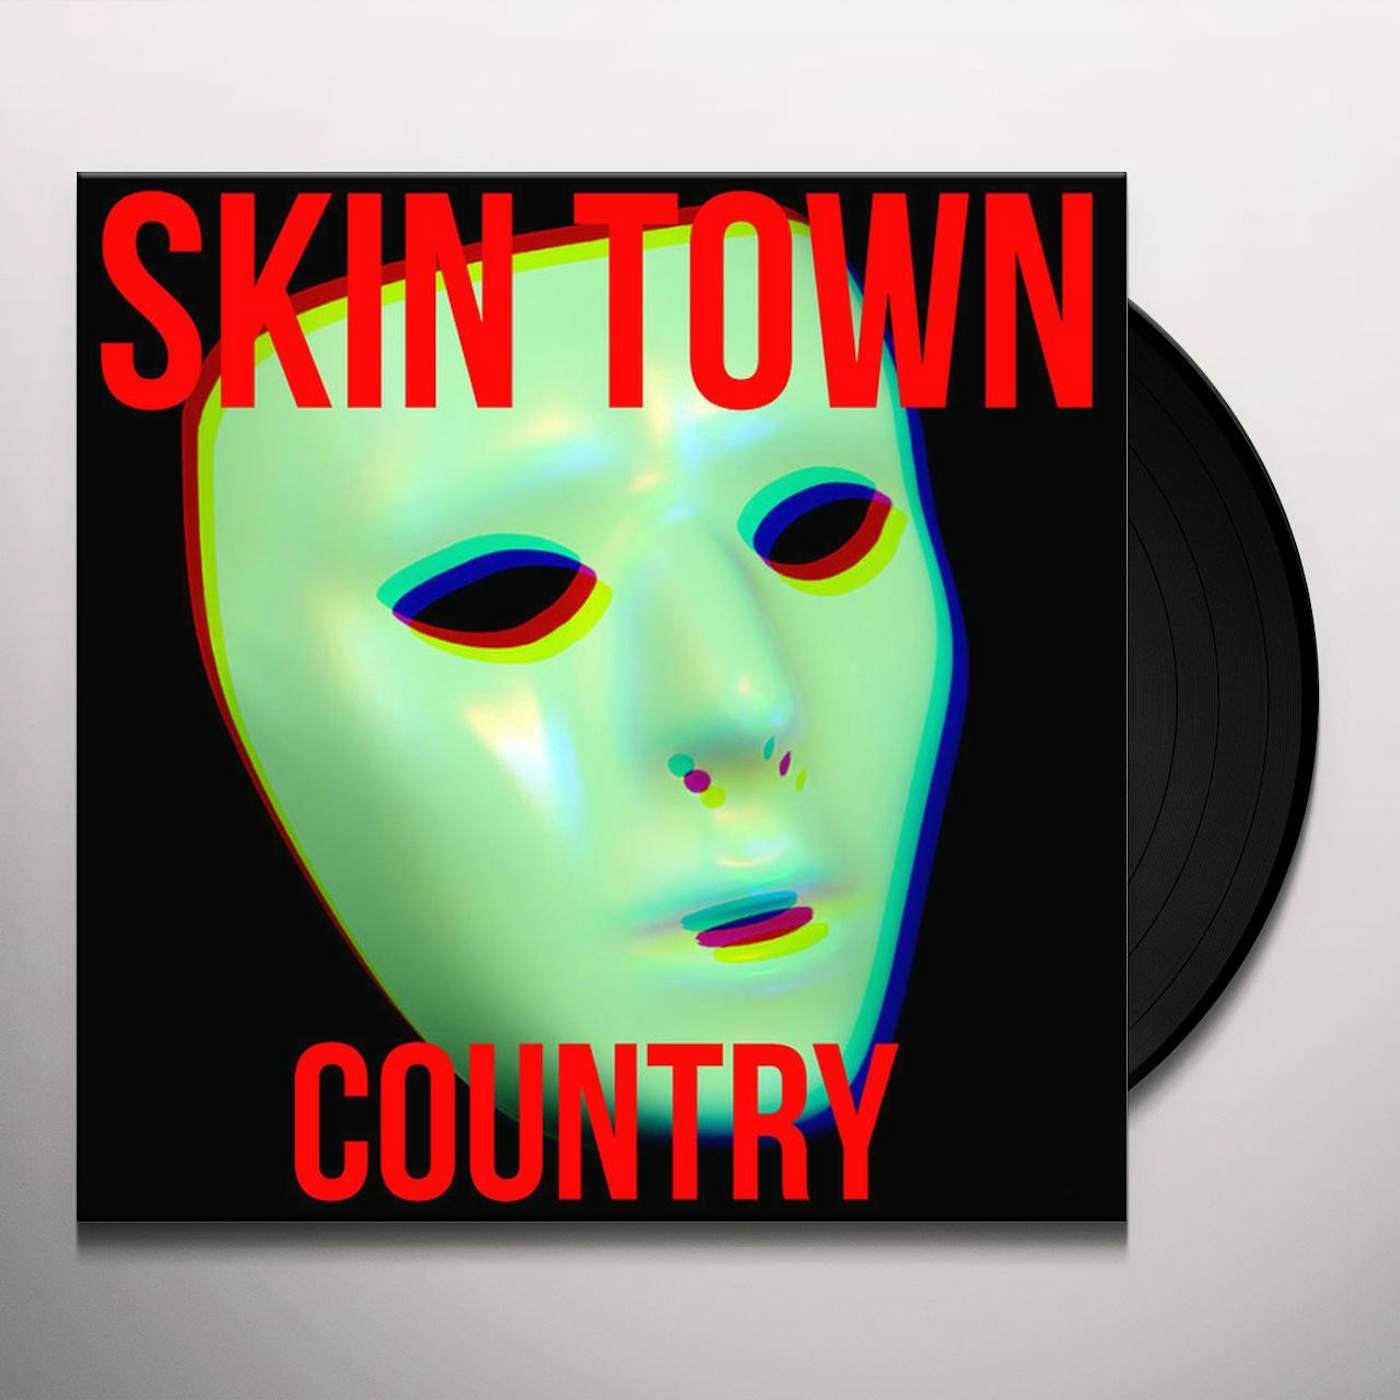 Skin Town Country Vinyl Record